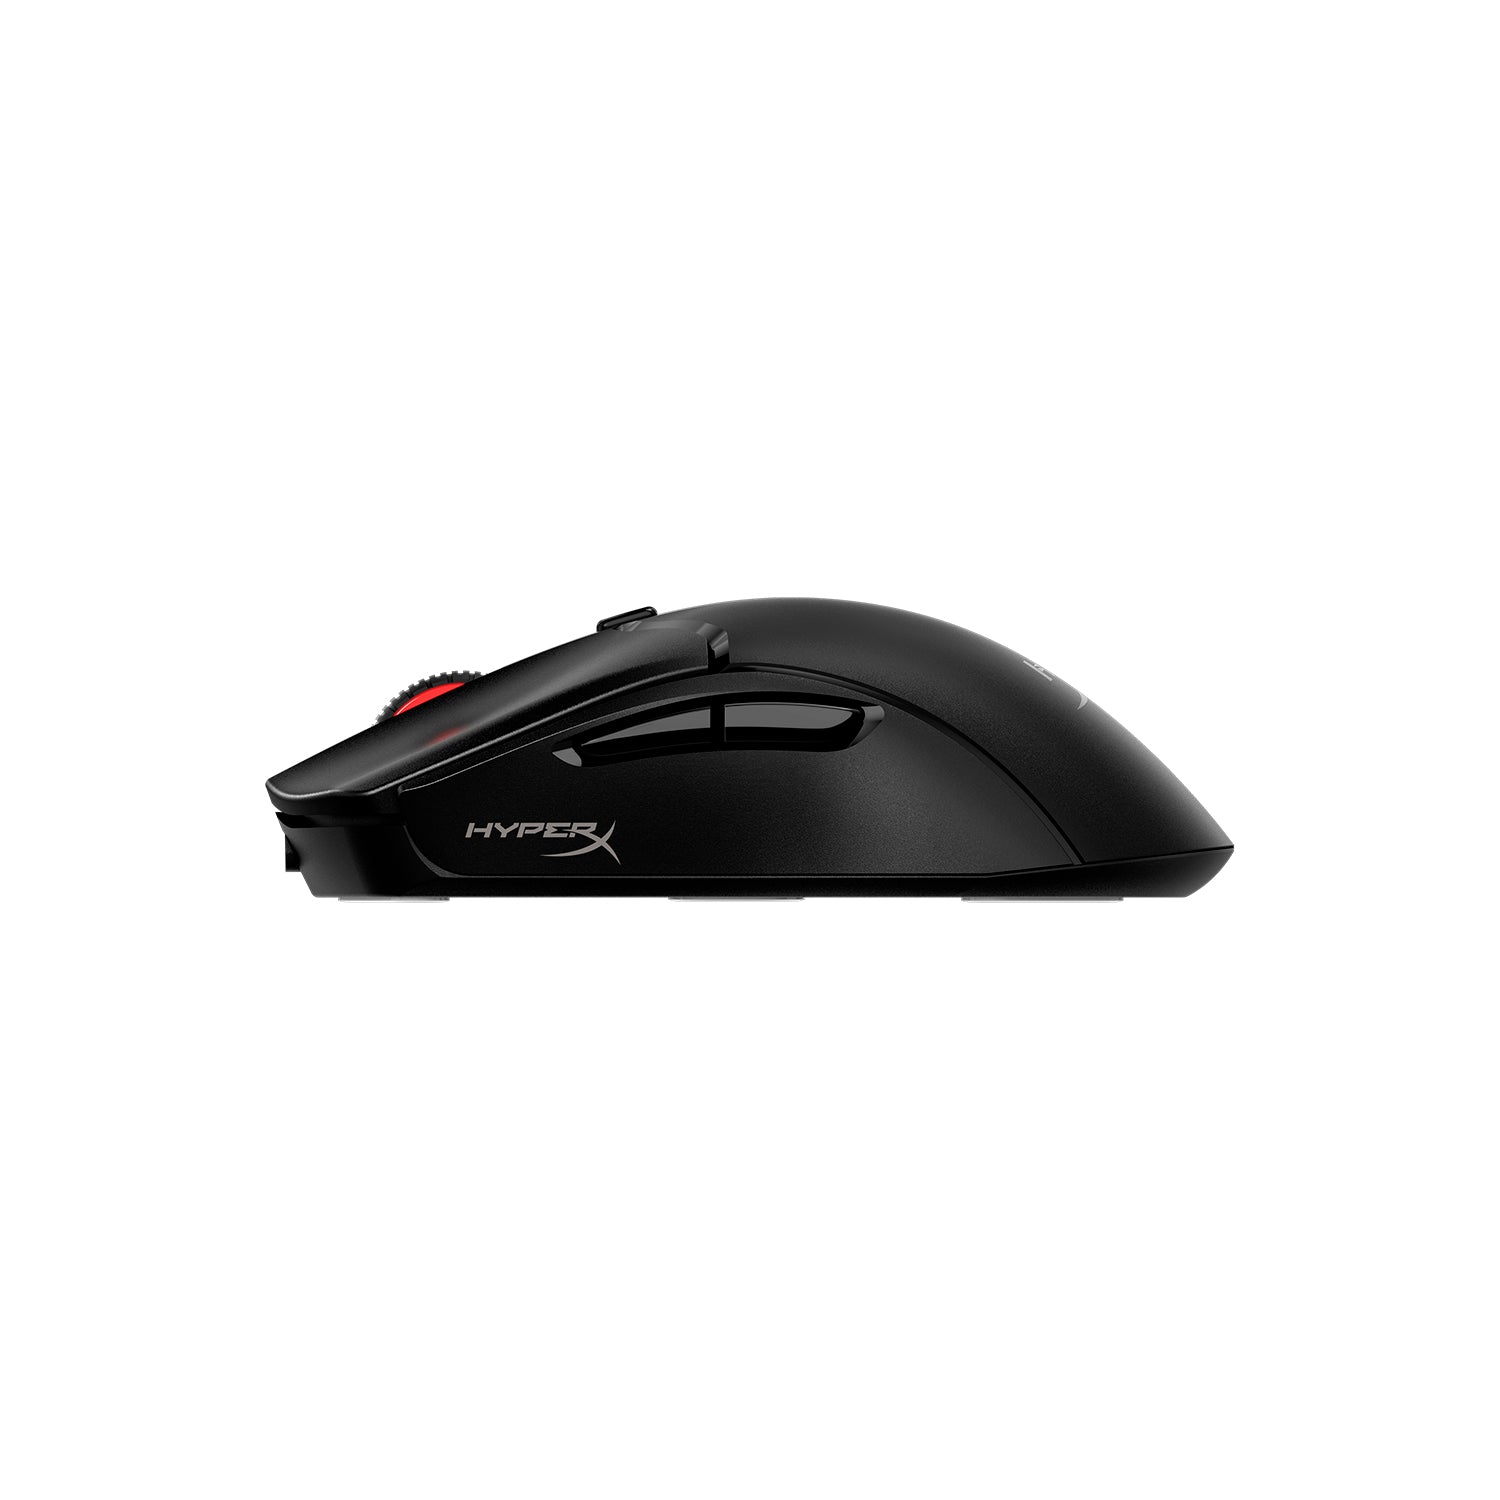 HyperX Pulsefire Haste 2 Mini Wireless Black Gaming Mouse - side view